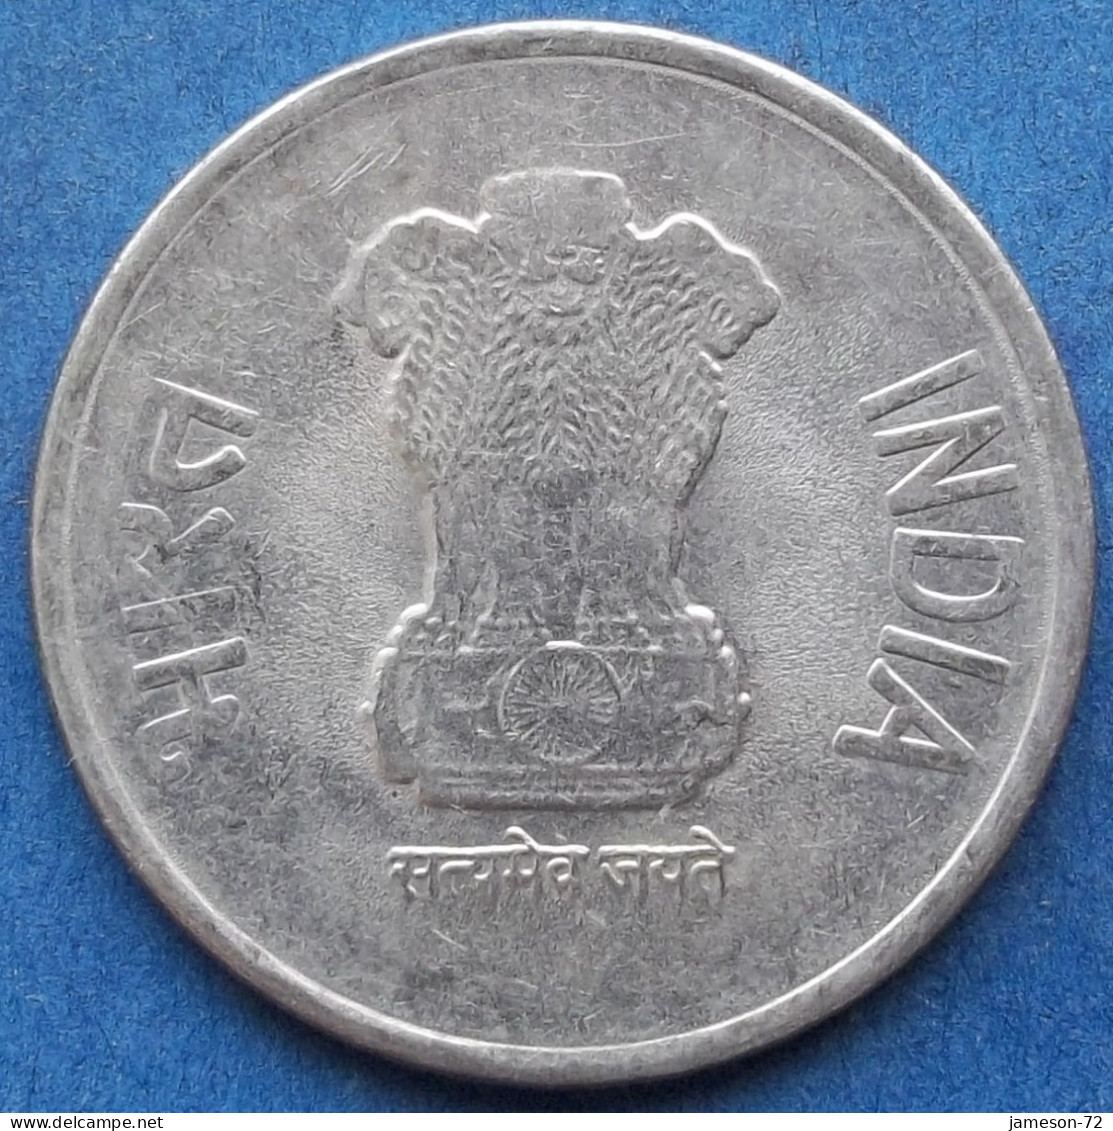 INDIA - 2 Rupees 2019 "Lotus Flowers" KM# 395 Republic Decimal Coinage (1957) - Edelweiss Coins - Georgien